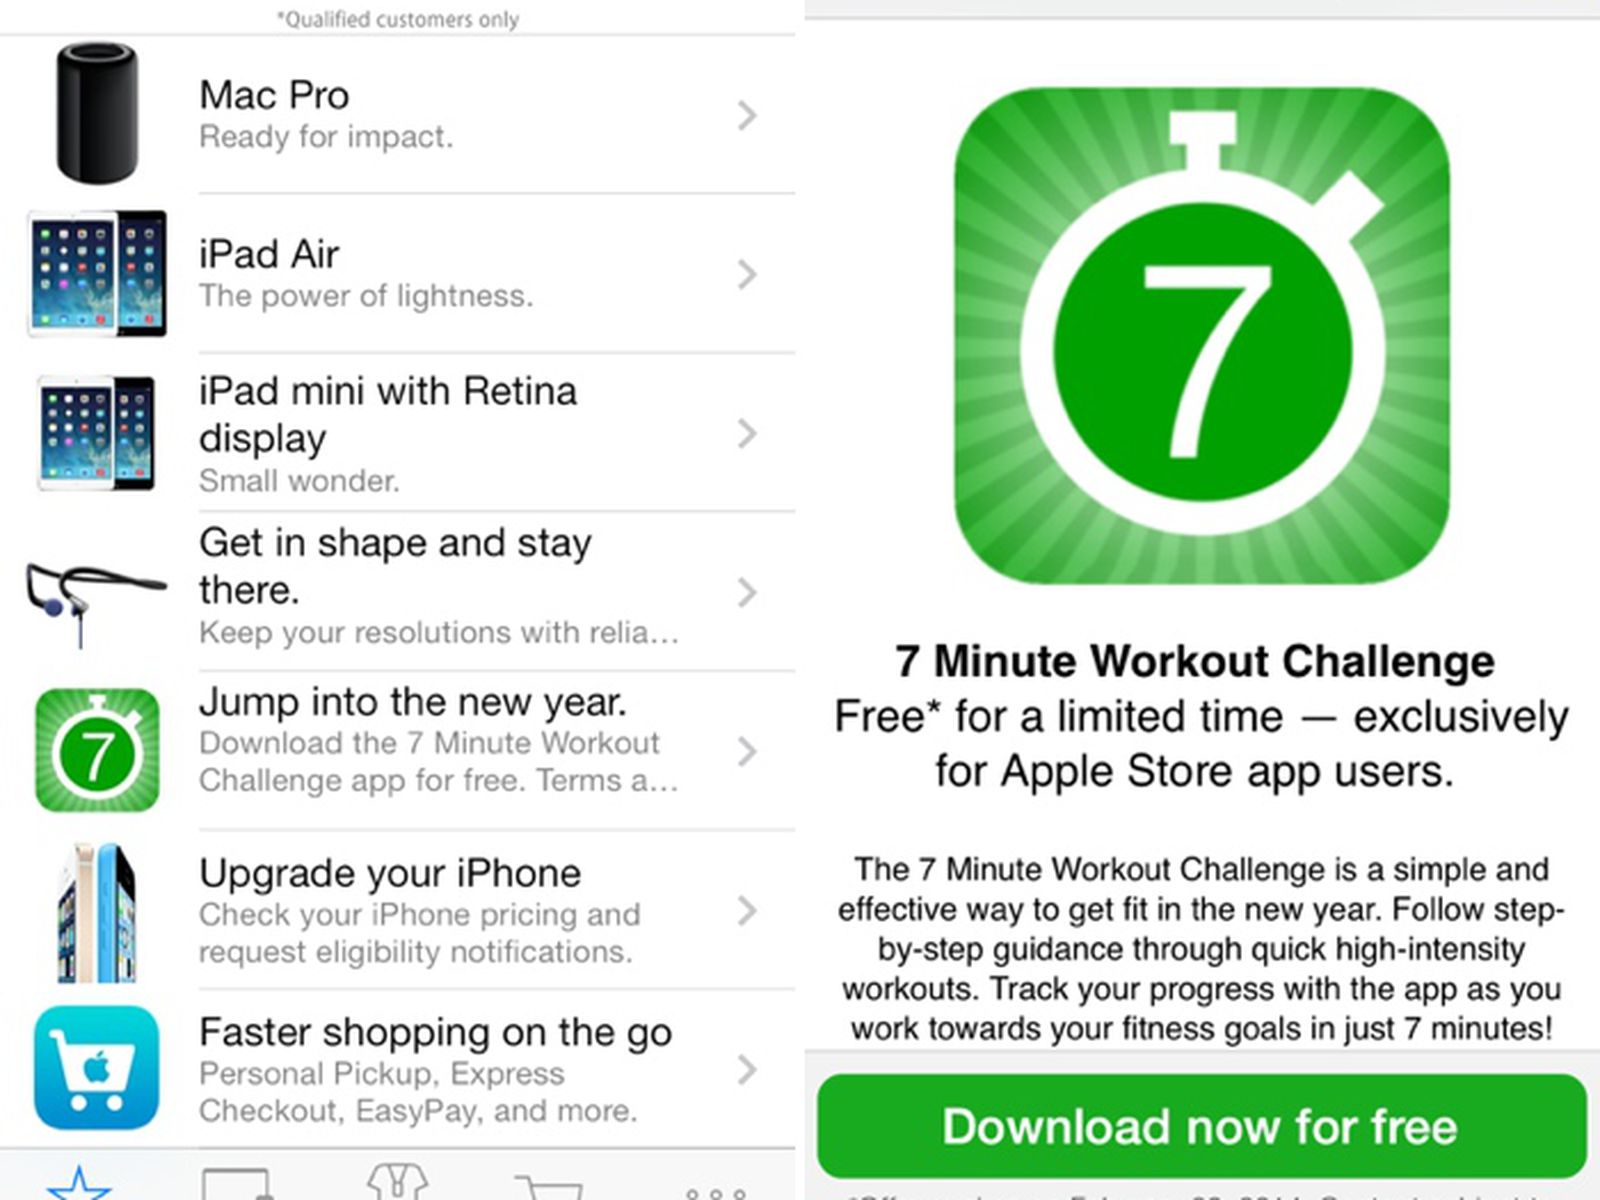 Terms apply. Challenge приложение. Check Phone. 7 Minute Workout.